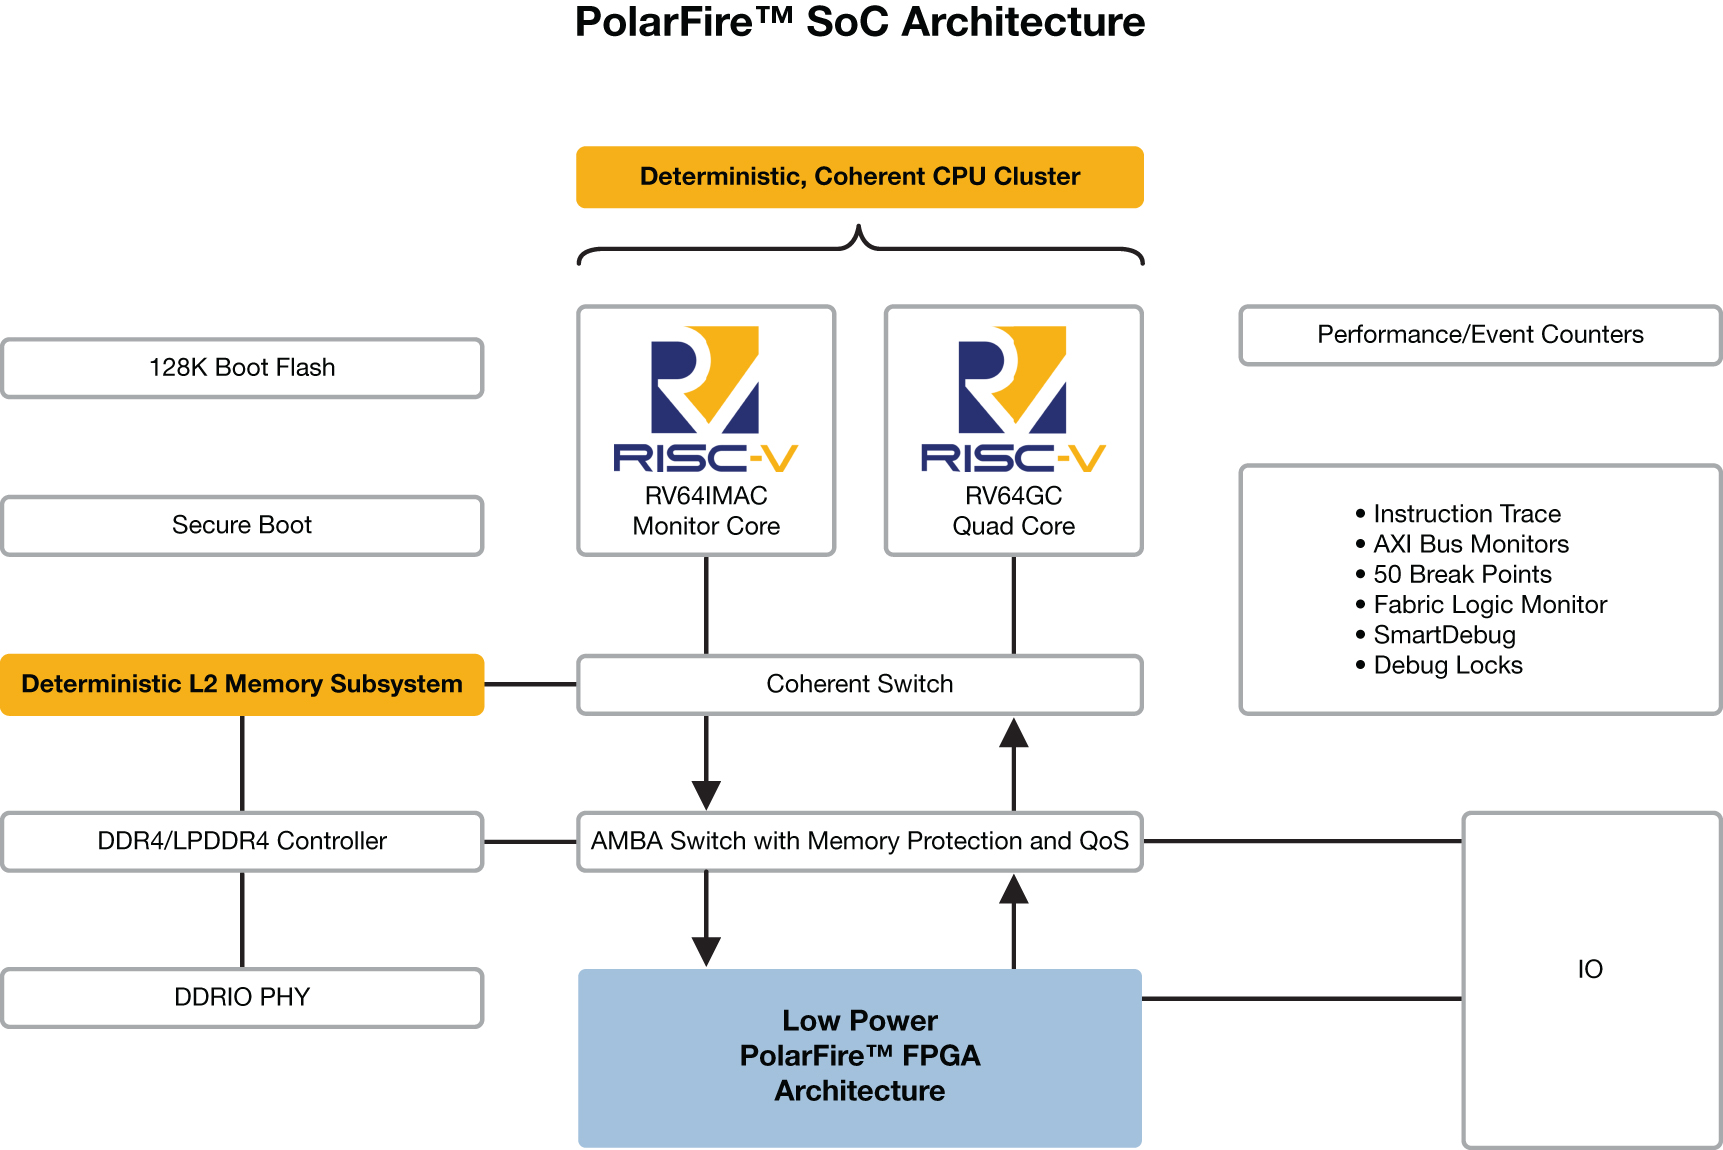 RISC-V SoC FPGA Architecture Brings Real-Time to Linux